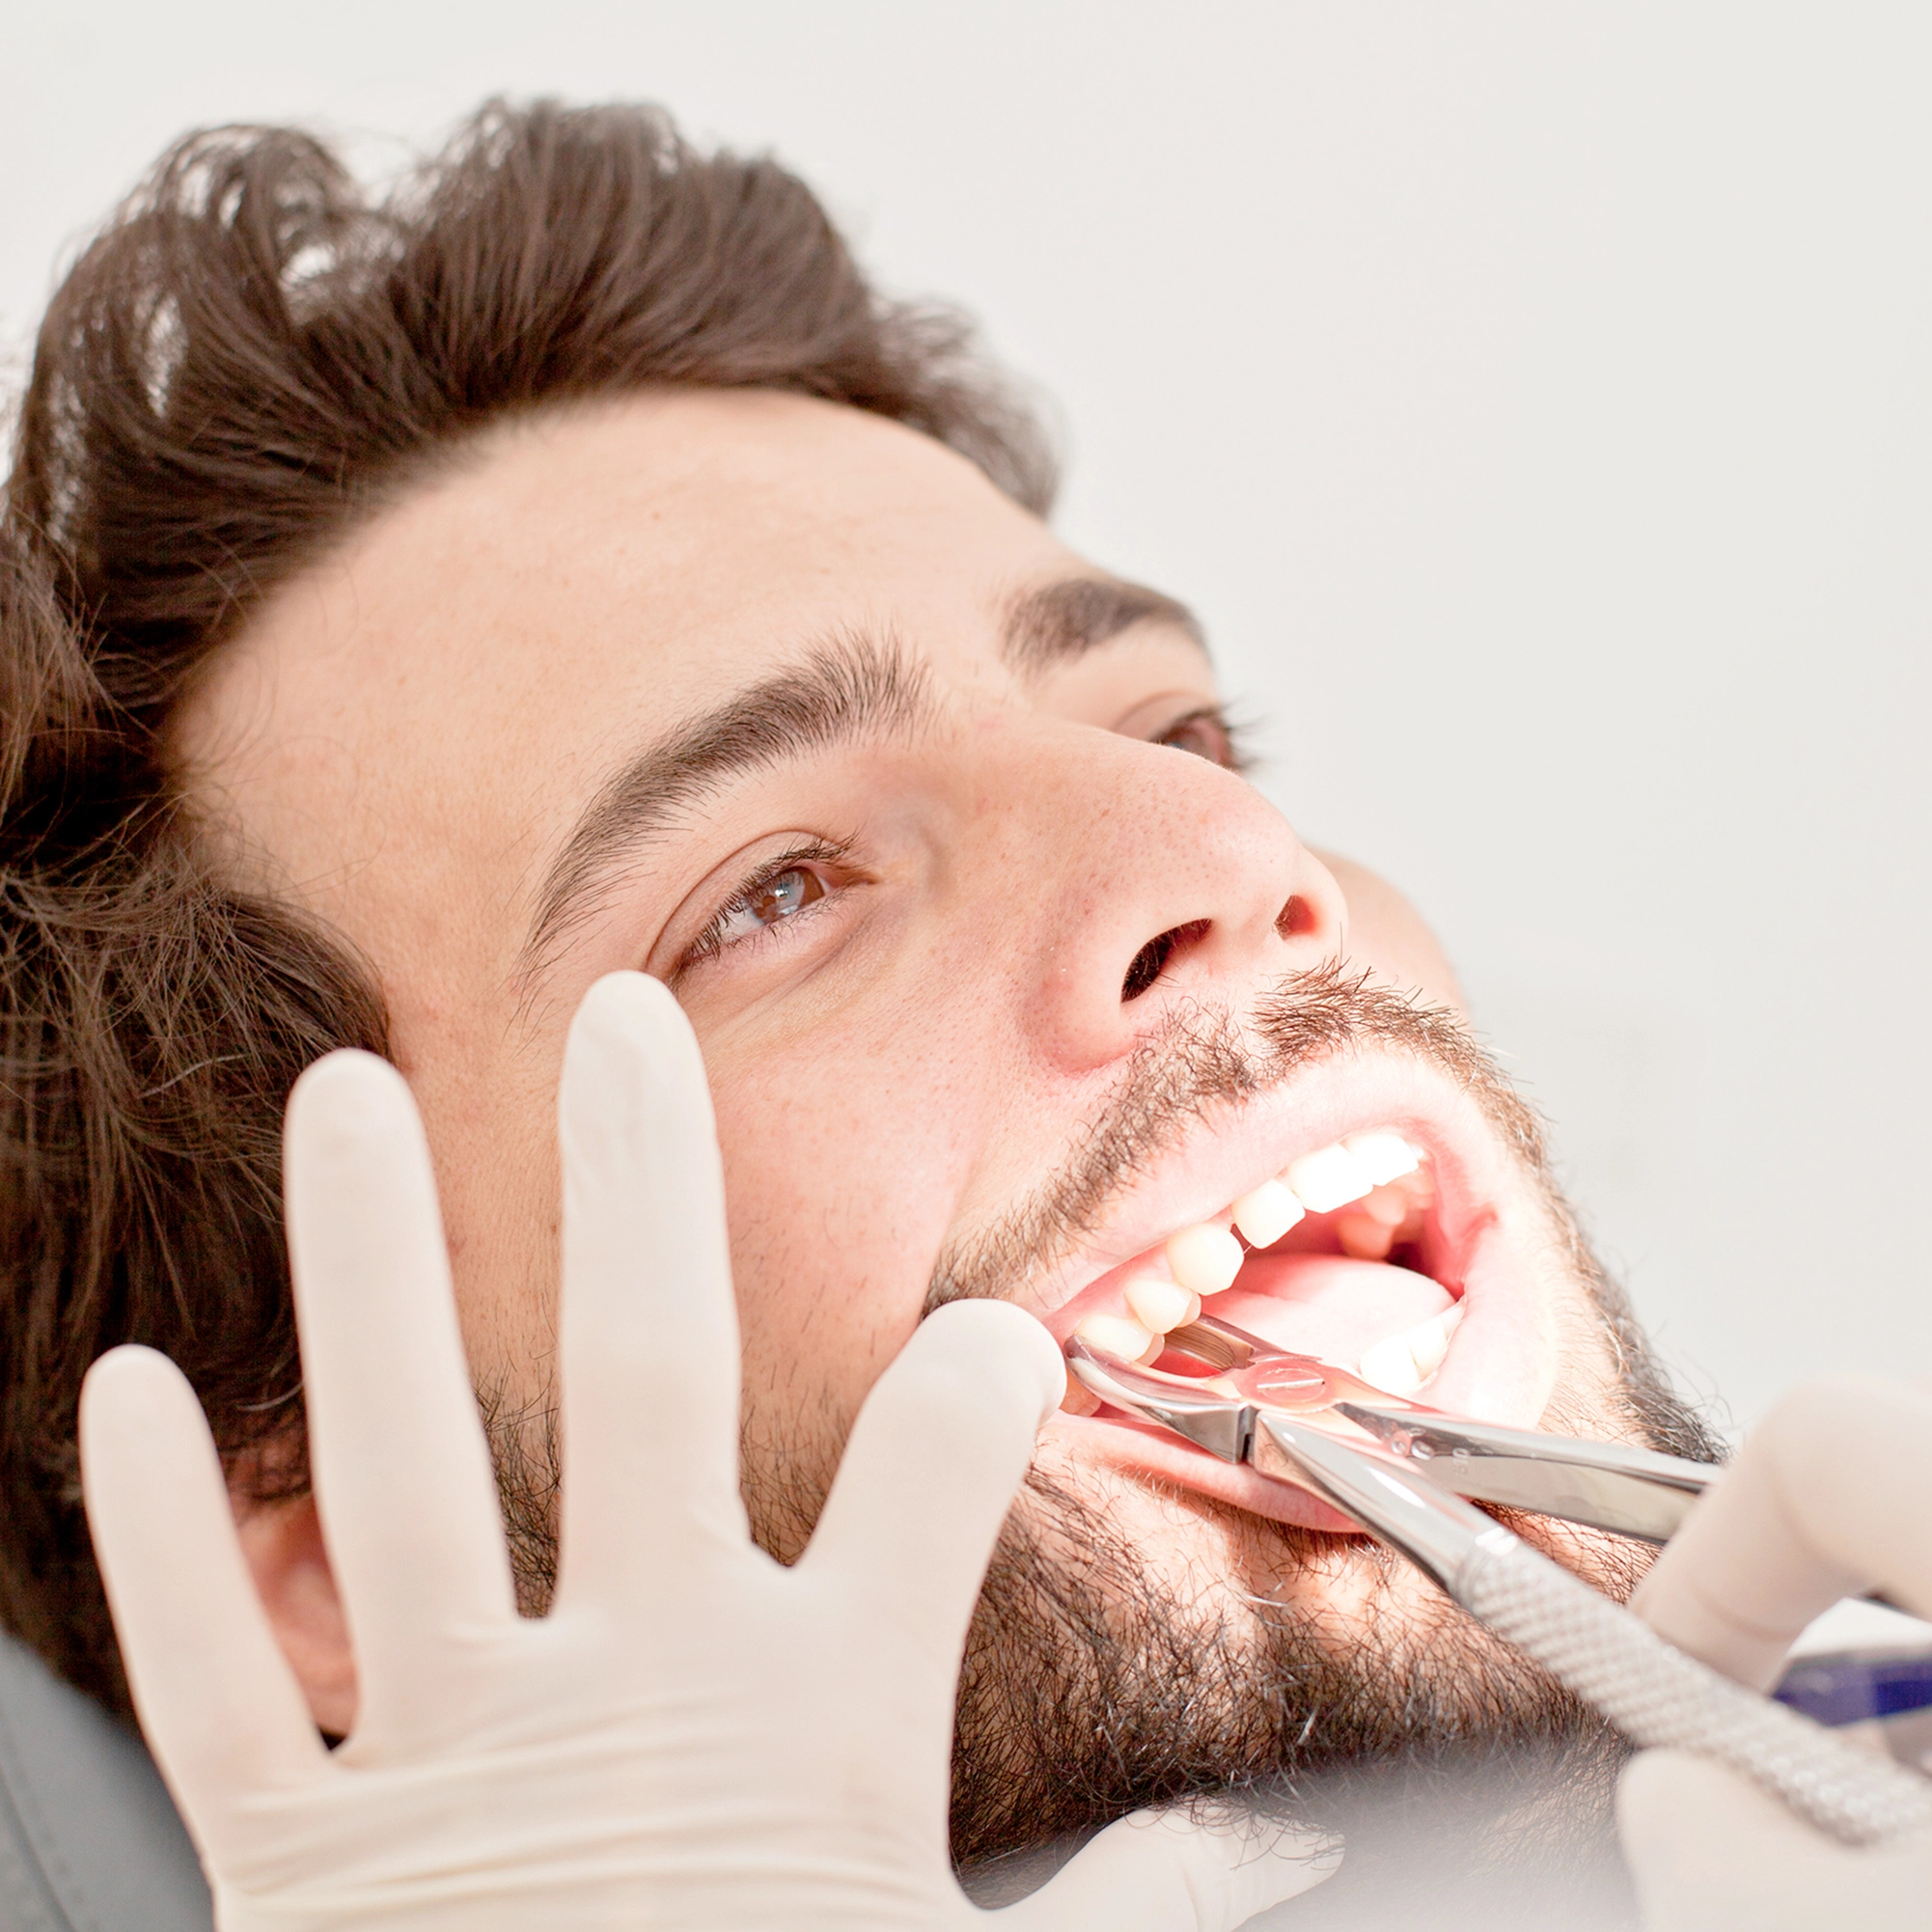 Dental Checkup Frequency: How Often to Visit